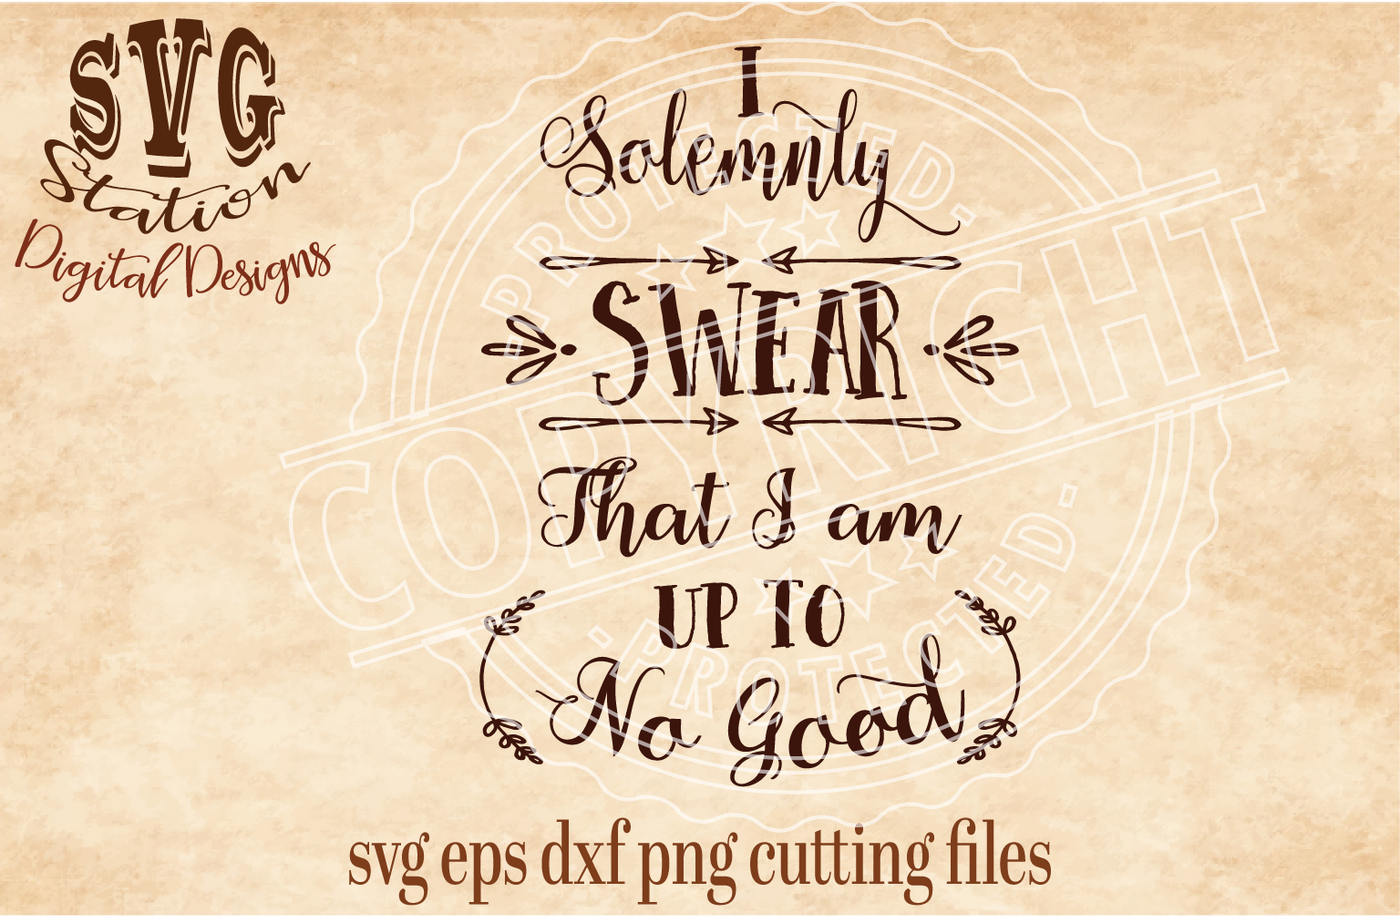 I Solemnly Swear I Am Up To No Good Svg Dxf Png Eps Cutting File Silhouette Cricut Scal By Svg Station Thehungryjpeg Com